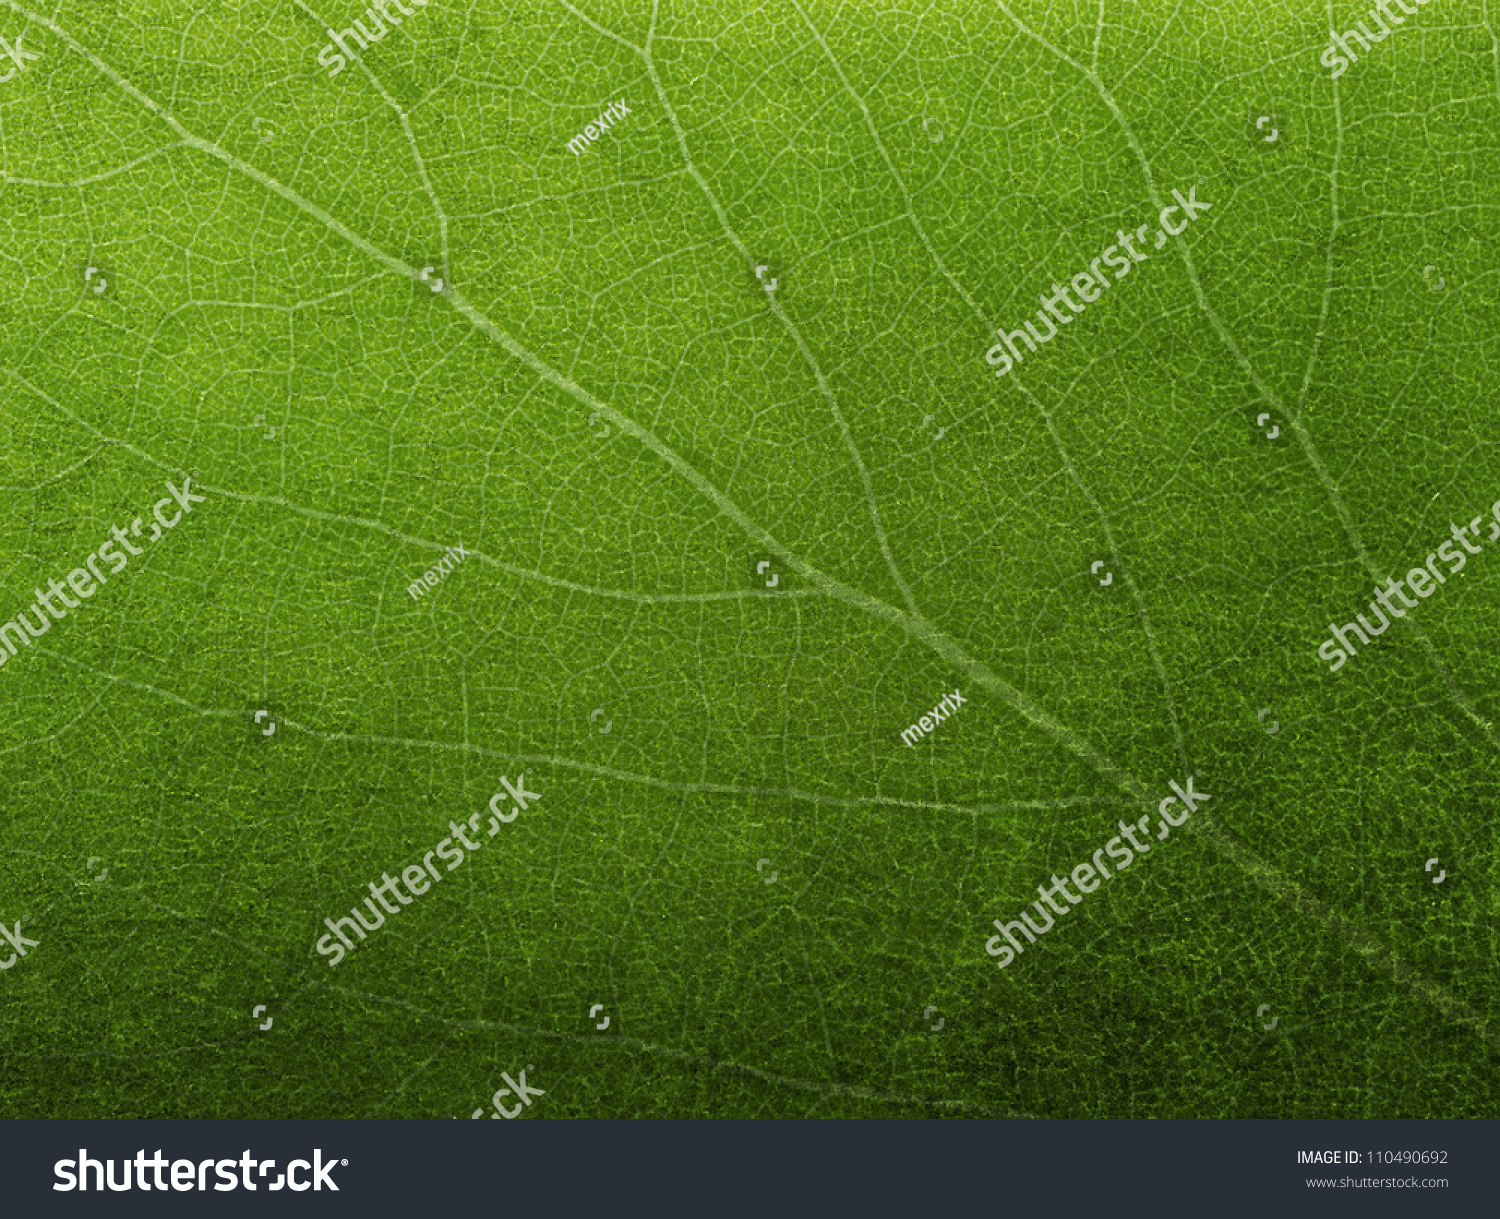 Abstract green leaf texture for background #110490692